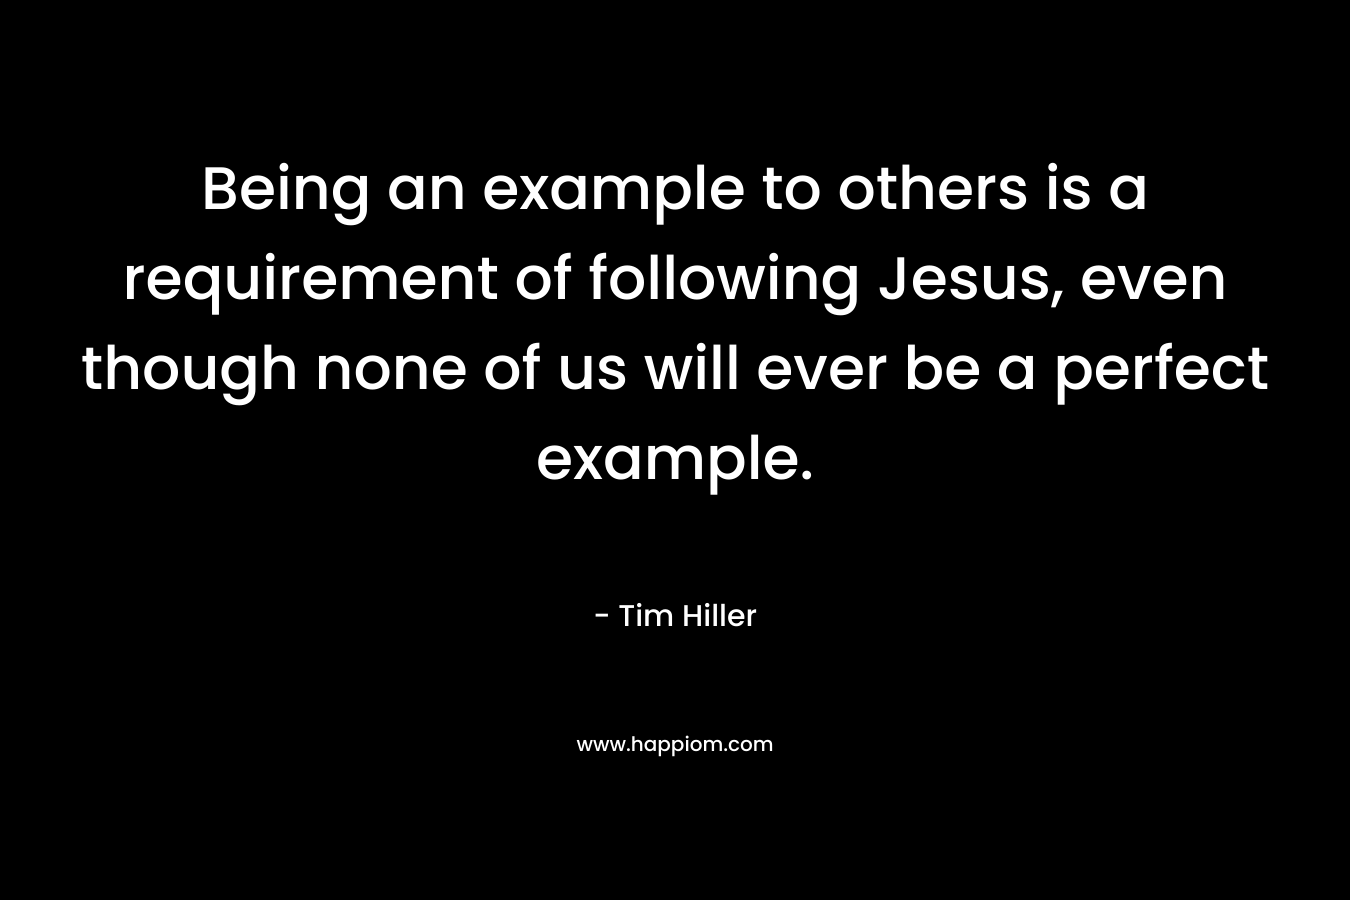 Being an example to others is a requirement of following Jesus, even though none of us will ever be a perfect example. – Tim Hiller